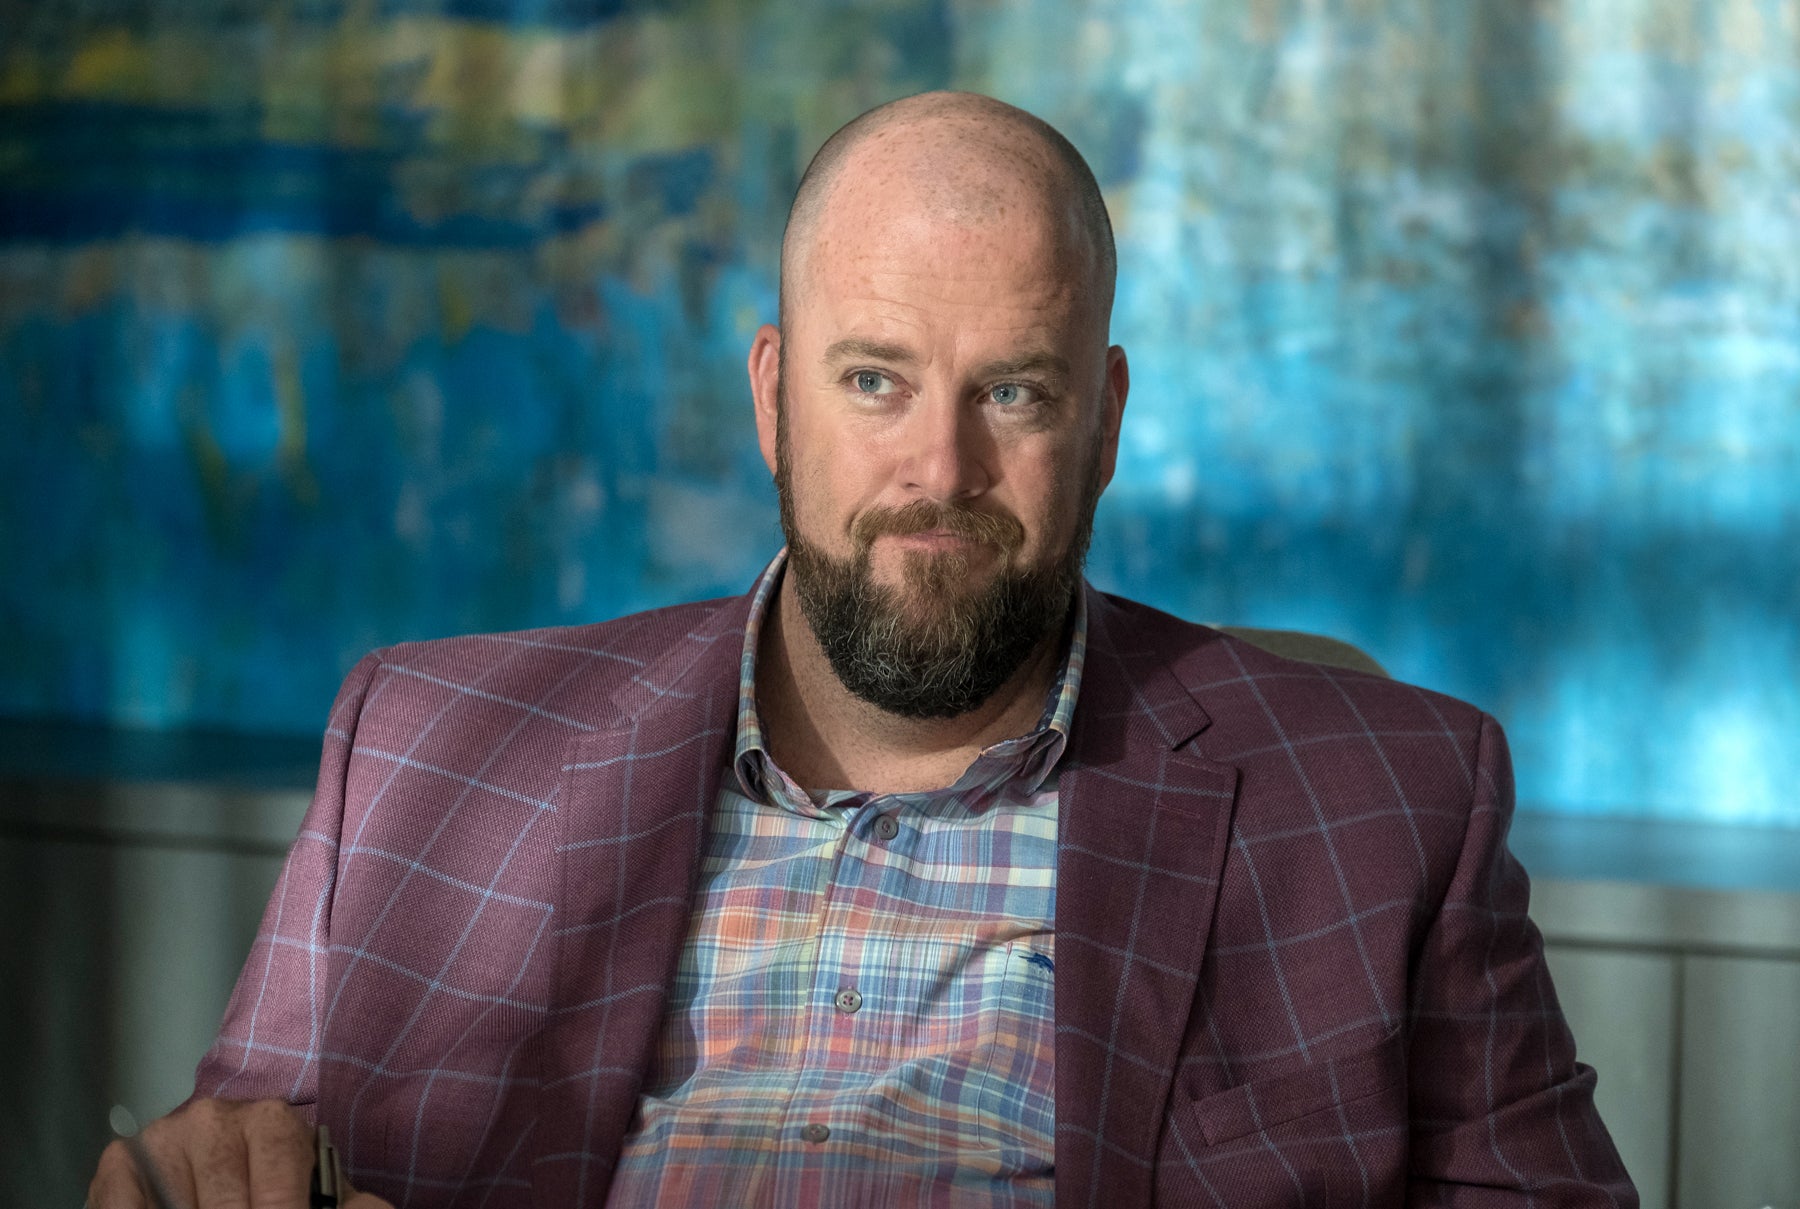 Toby (Chris Sullivan) sits in front of a blue mural wearing a plaid jacket and shirt in an episode of This Is Us.